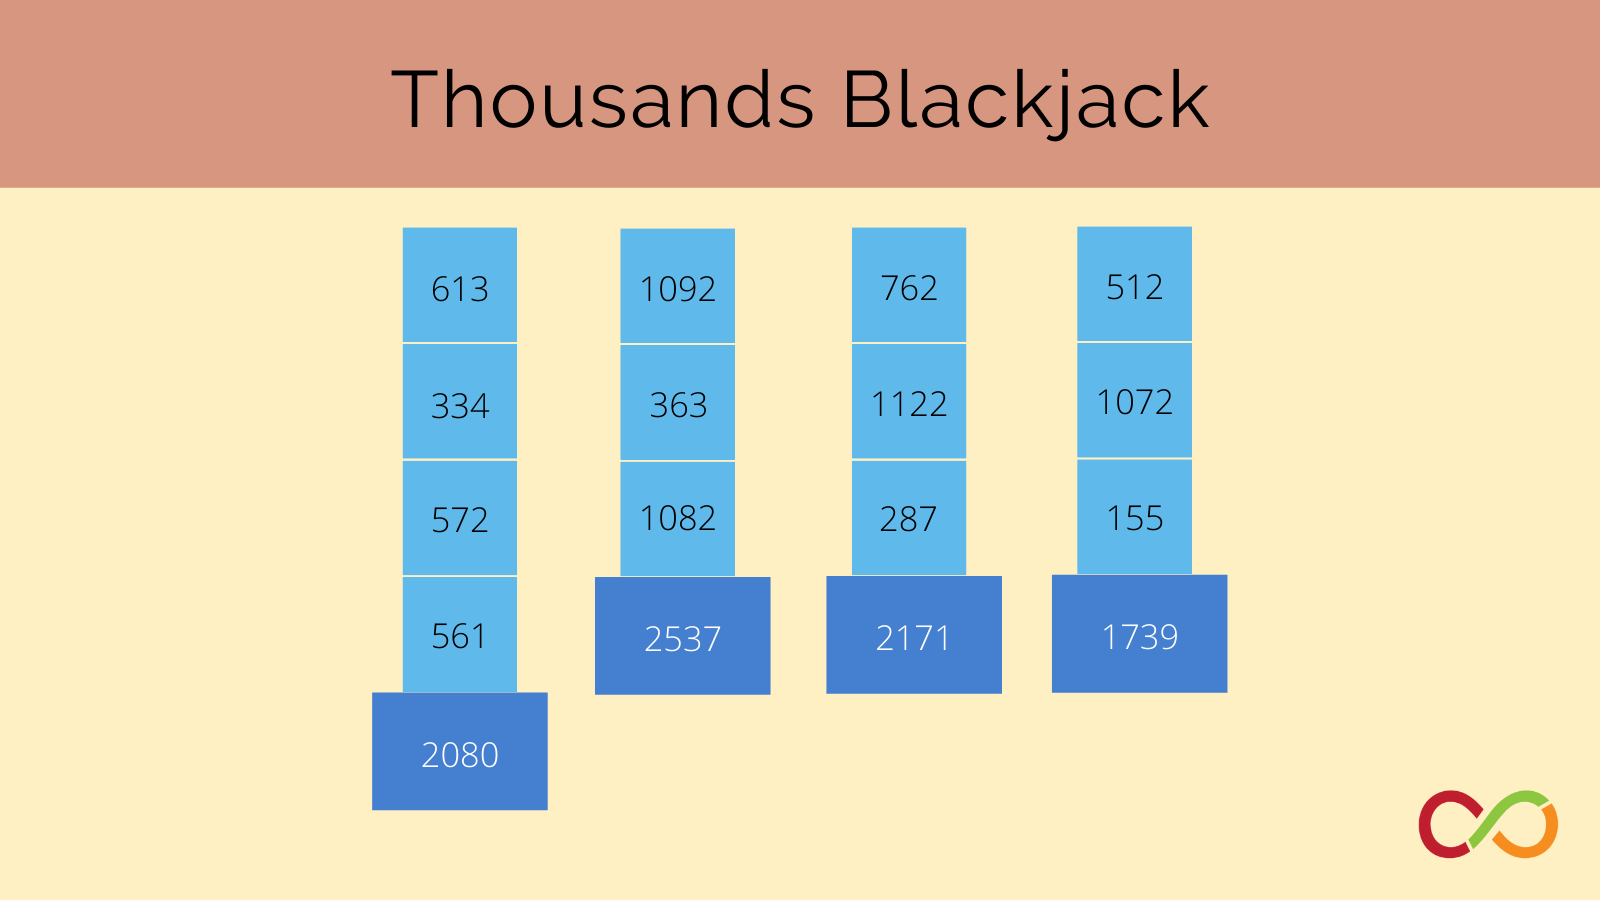 An image linking to the Thousands Blackjack lesson